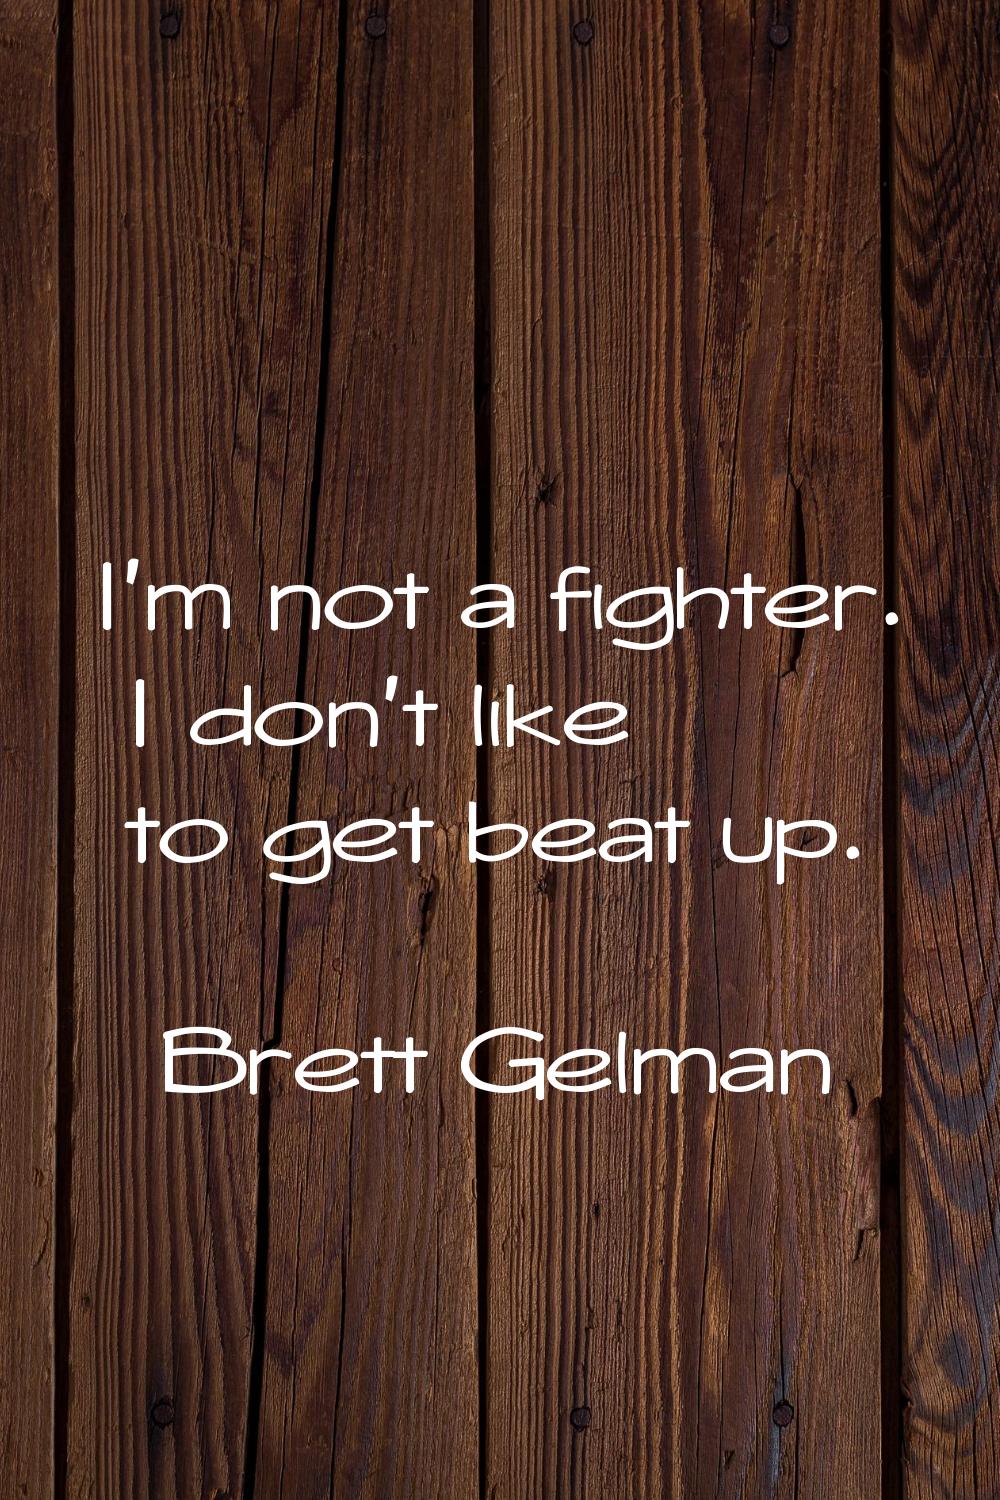 I'm not a fighter. I don't like to get beat up.